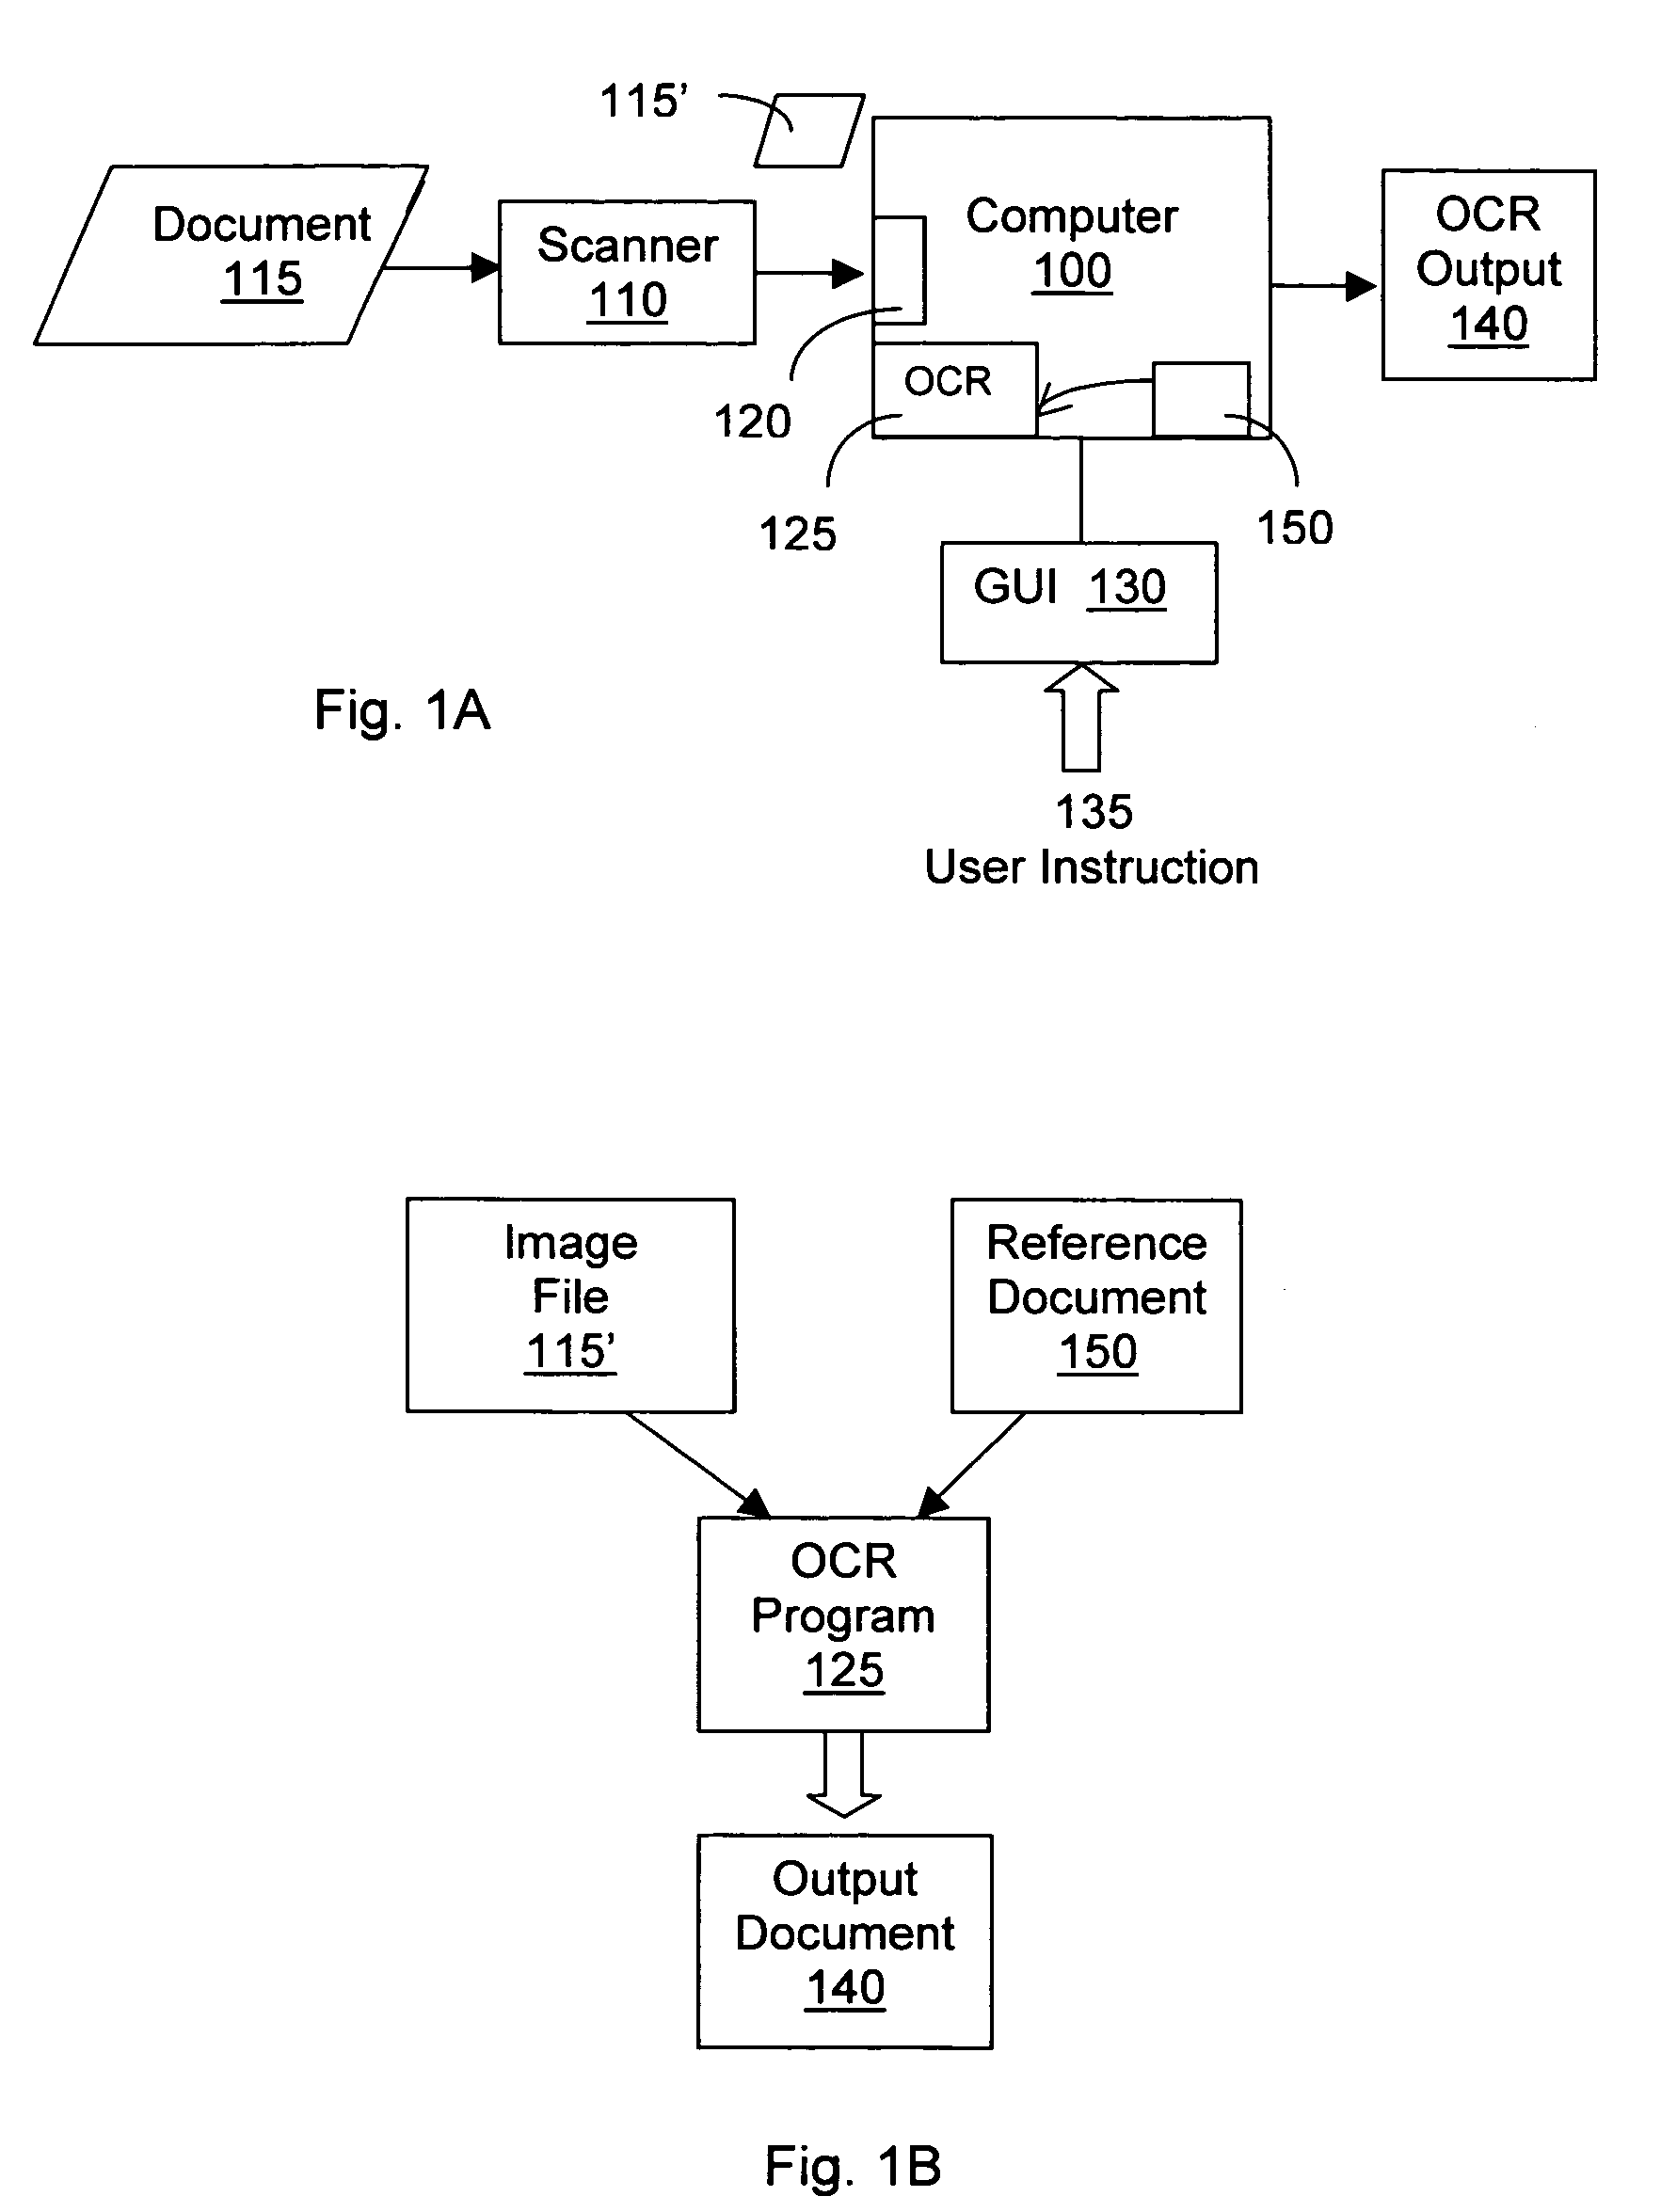 User control of computer peripheral apparatuses to perform tasks according to user input image file